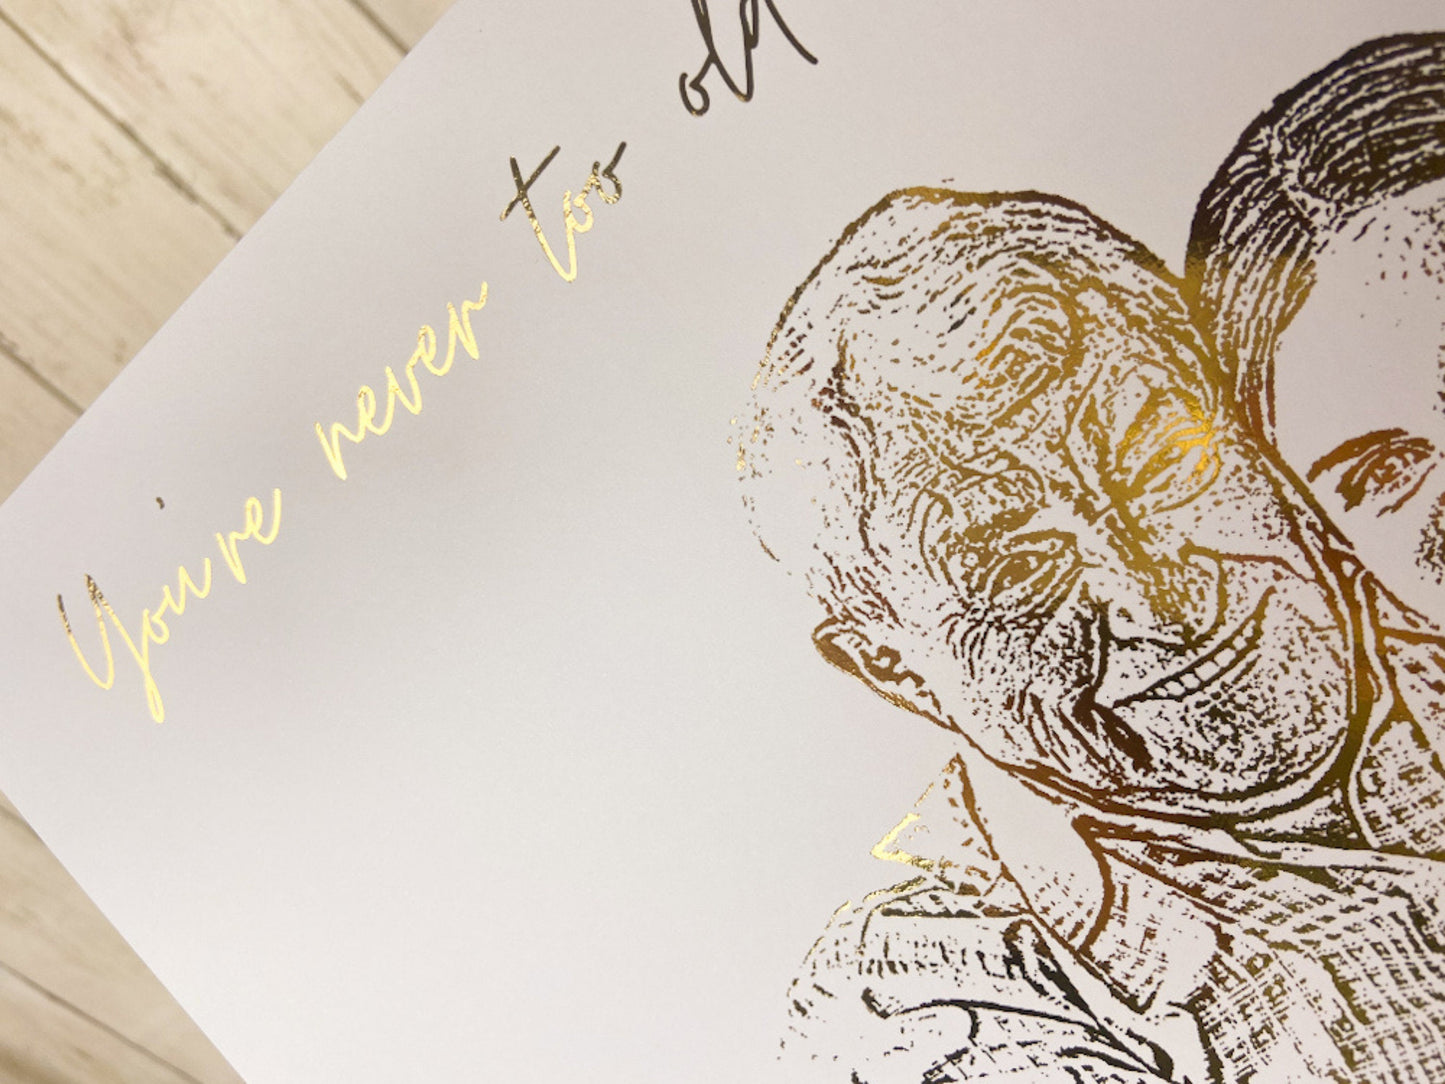 You're never too old to need your dad Foil Print , Sentimental Gift from Daughter